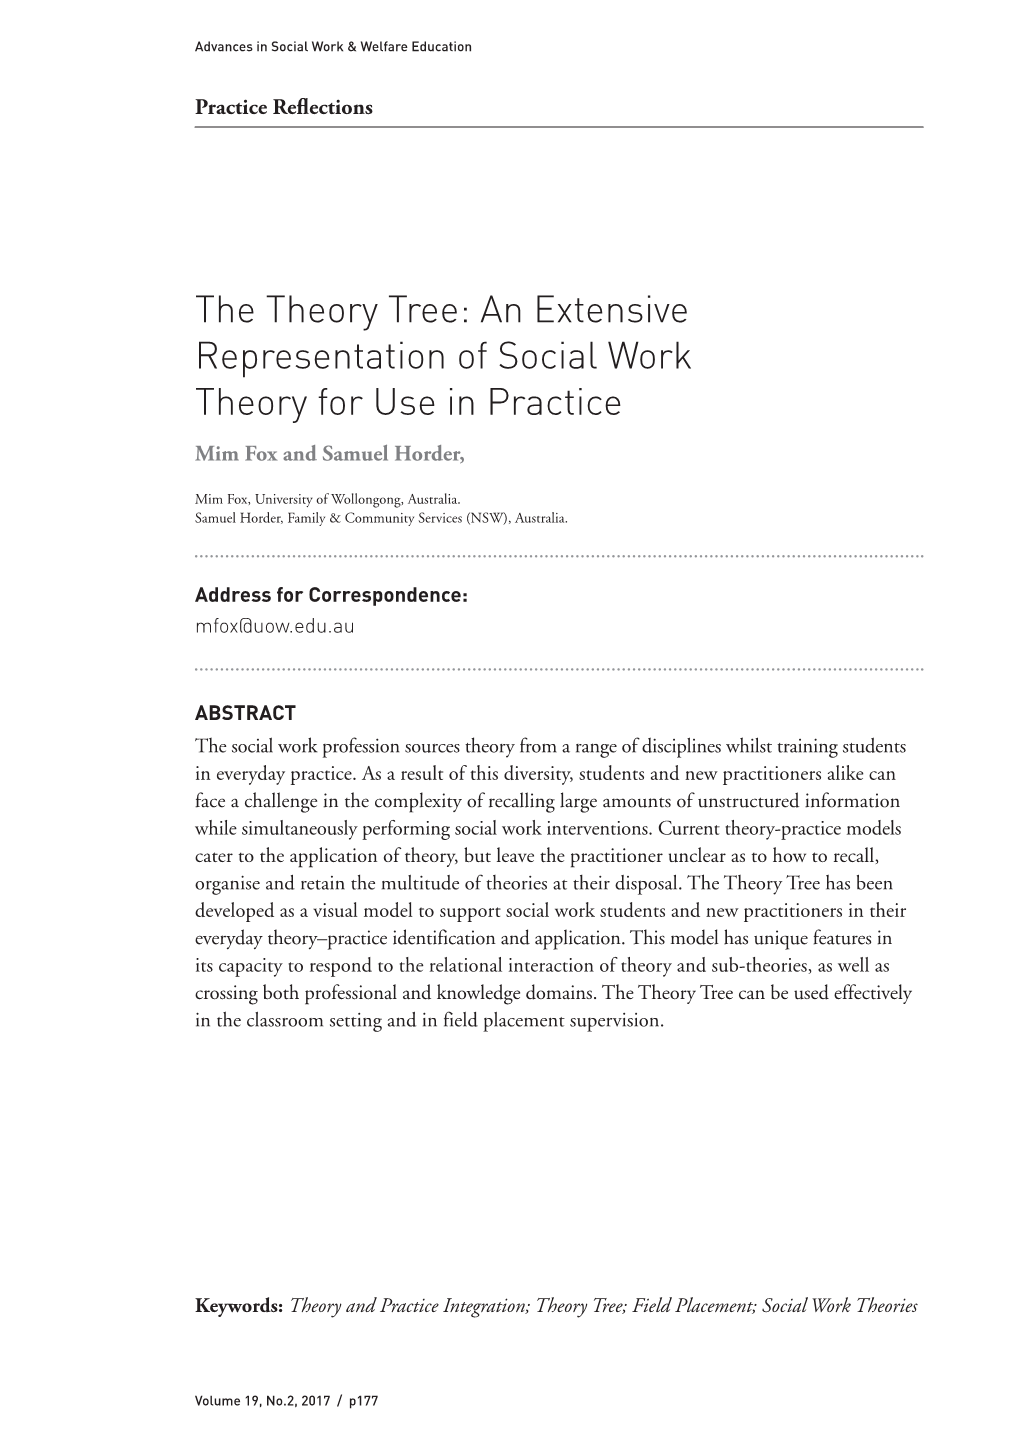 The Theory Tree: an Extensive Representation of Social Work Theory for Use in Practice Mim Fox and Samuel Horder